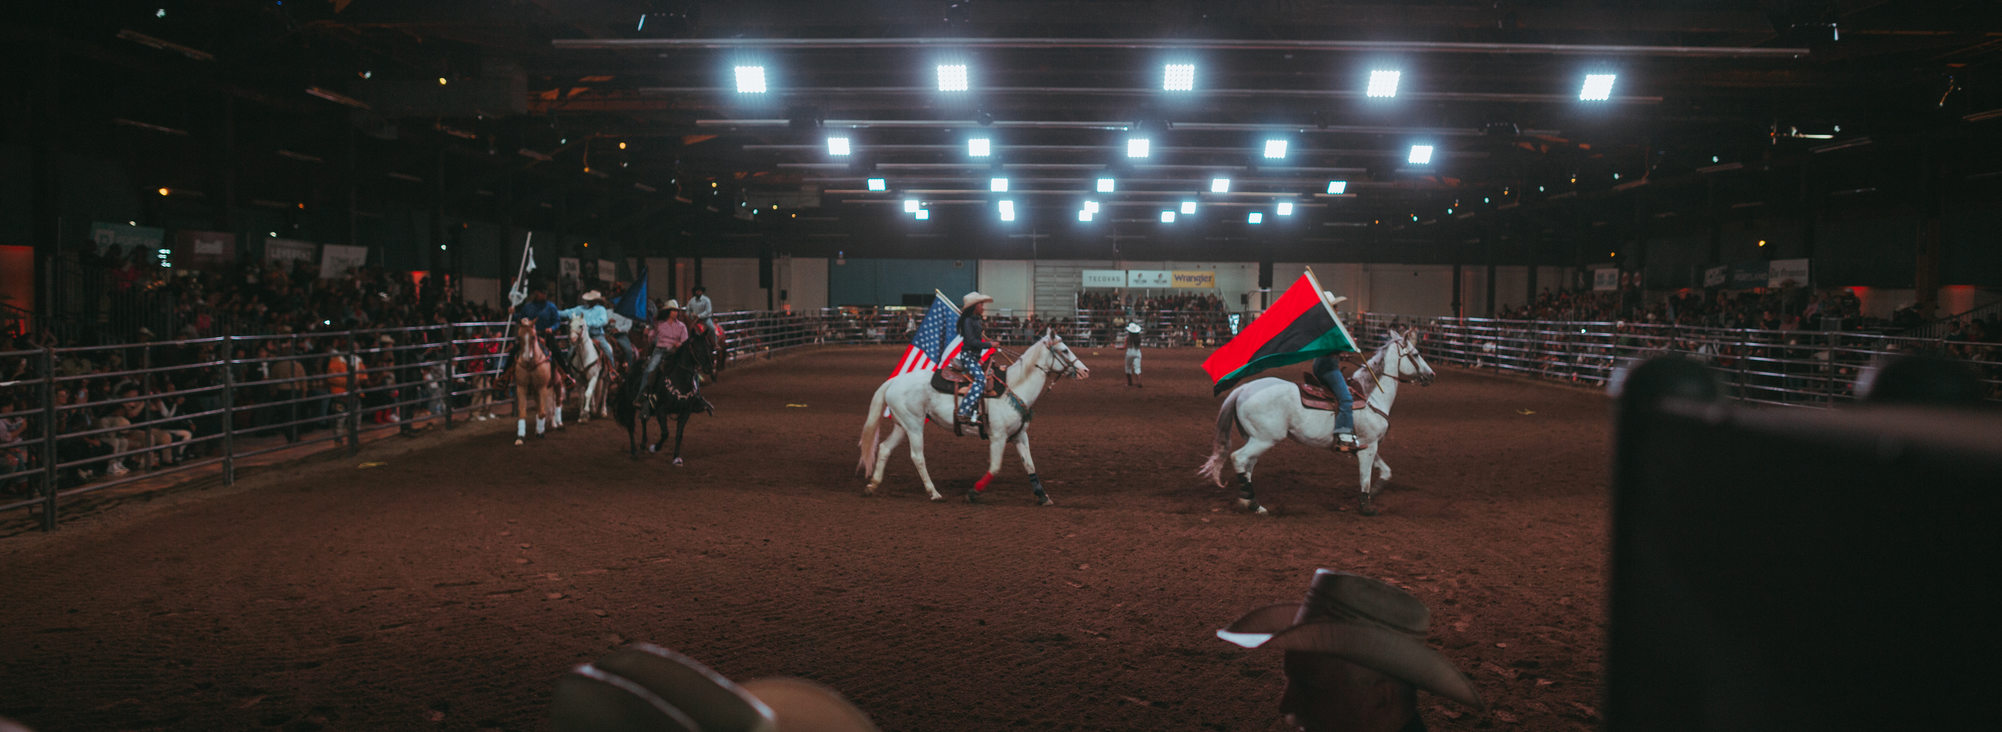 A group of rodeo participants ride their horses in a circle while carrying large flags from their home countries in the arena at Expo Center.